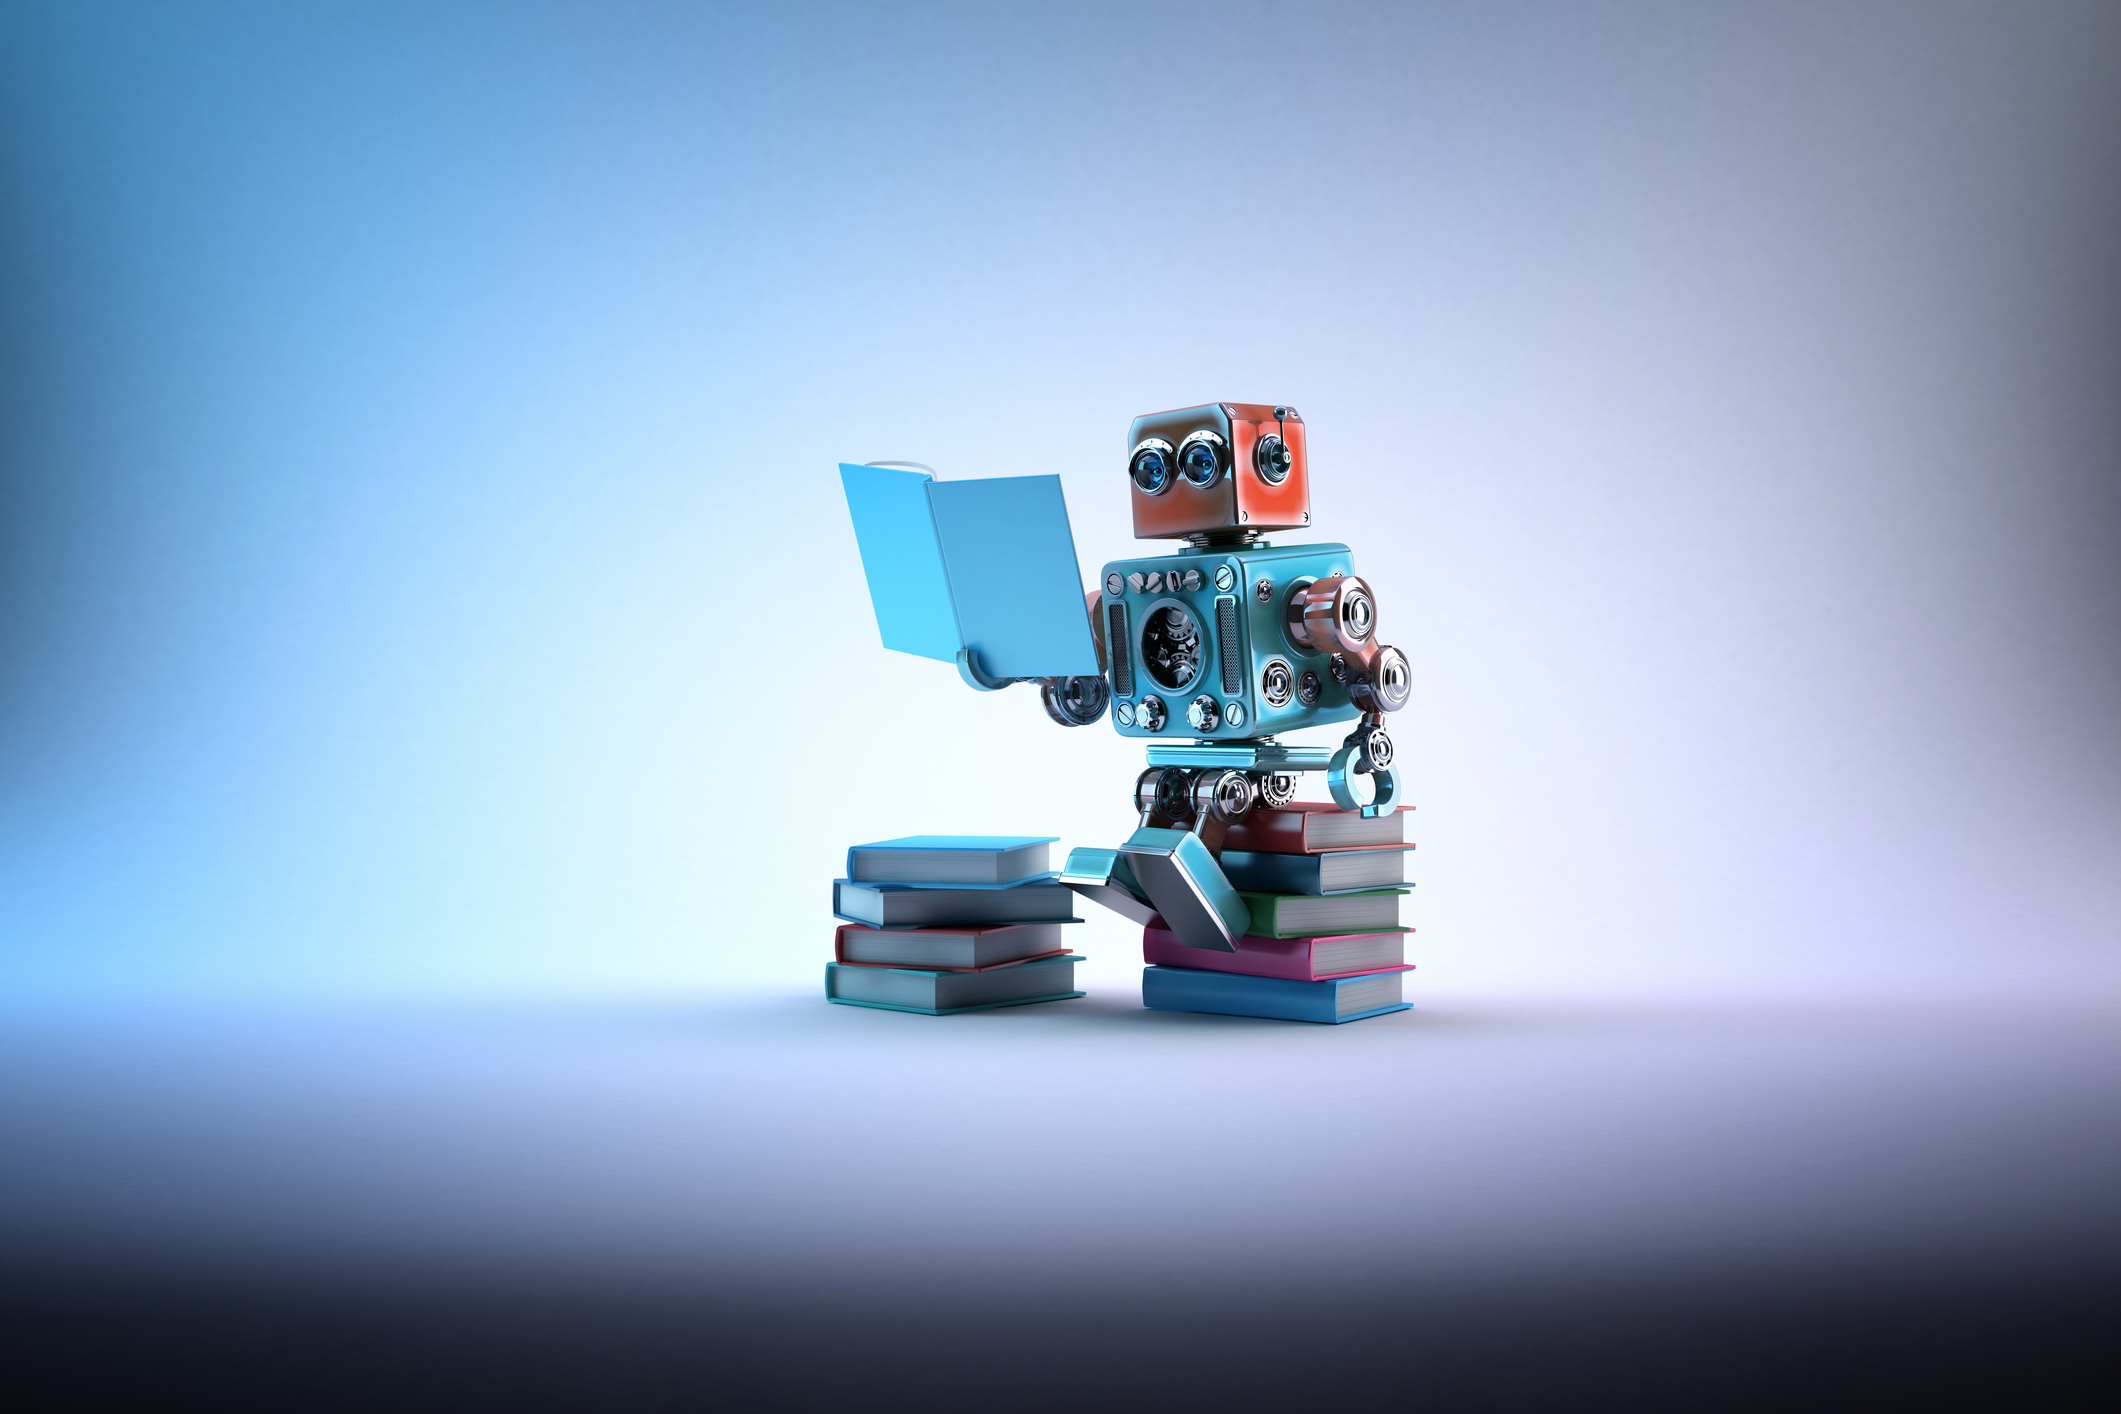 Robot sitting on a bunch of books